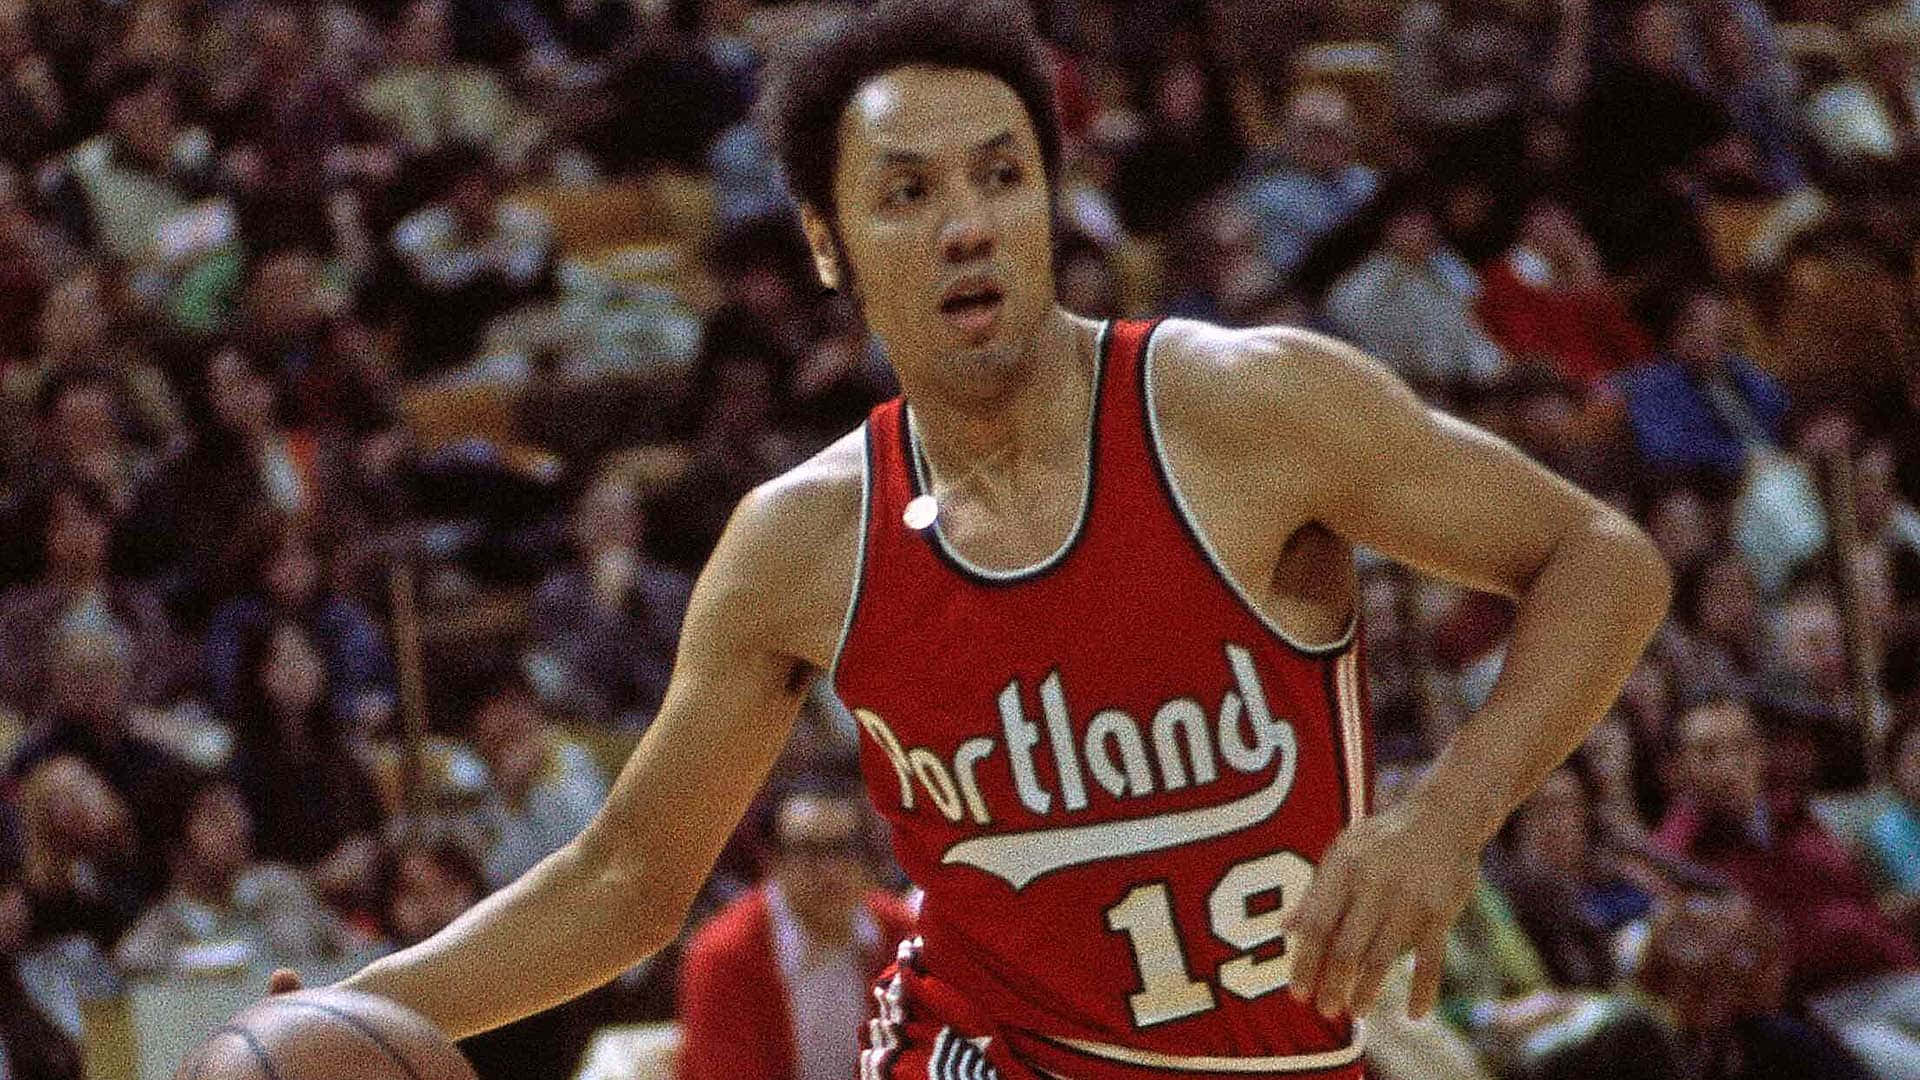 Salada Fama Lenny Wilkens - This Could Be A Potential Computer Or Mobile Wallpaper Design Featuring Former Nba Player And Coach Lenny Wilkens. Papel de Parede